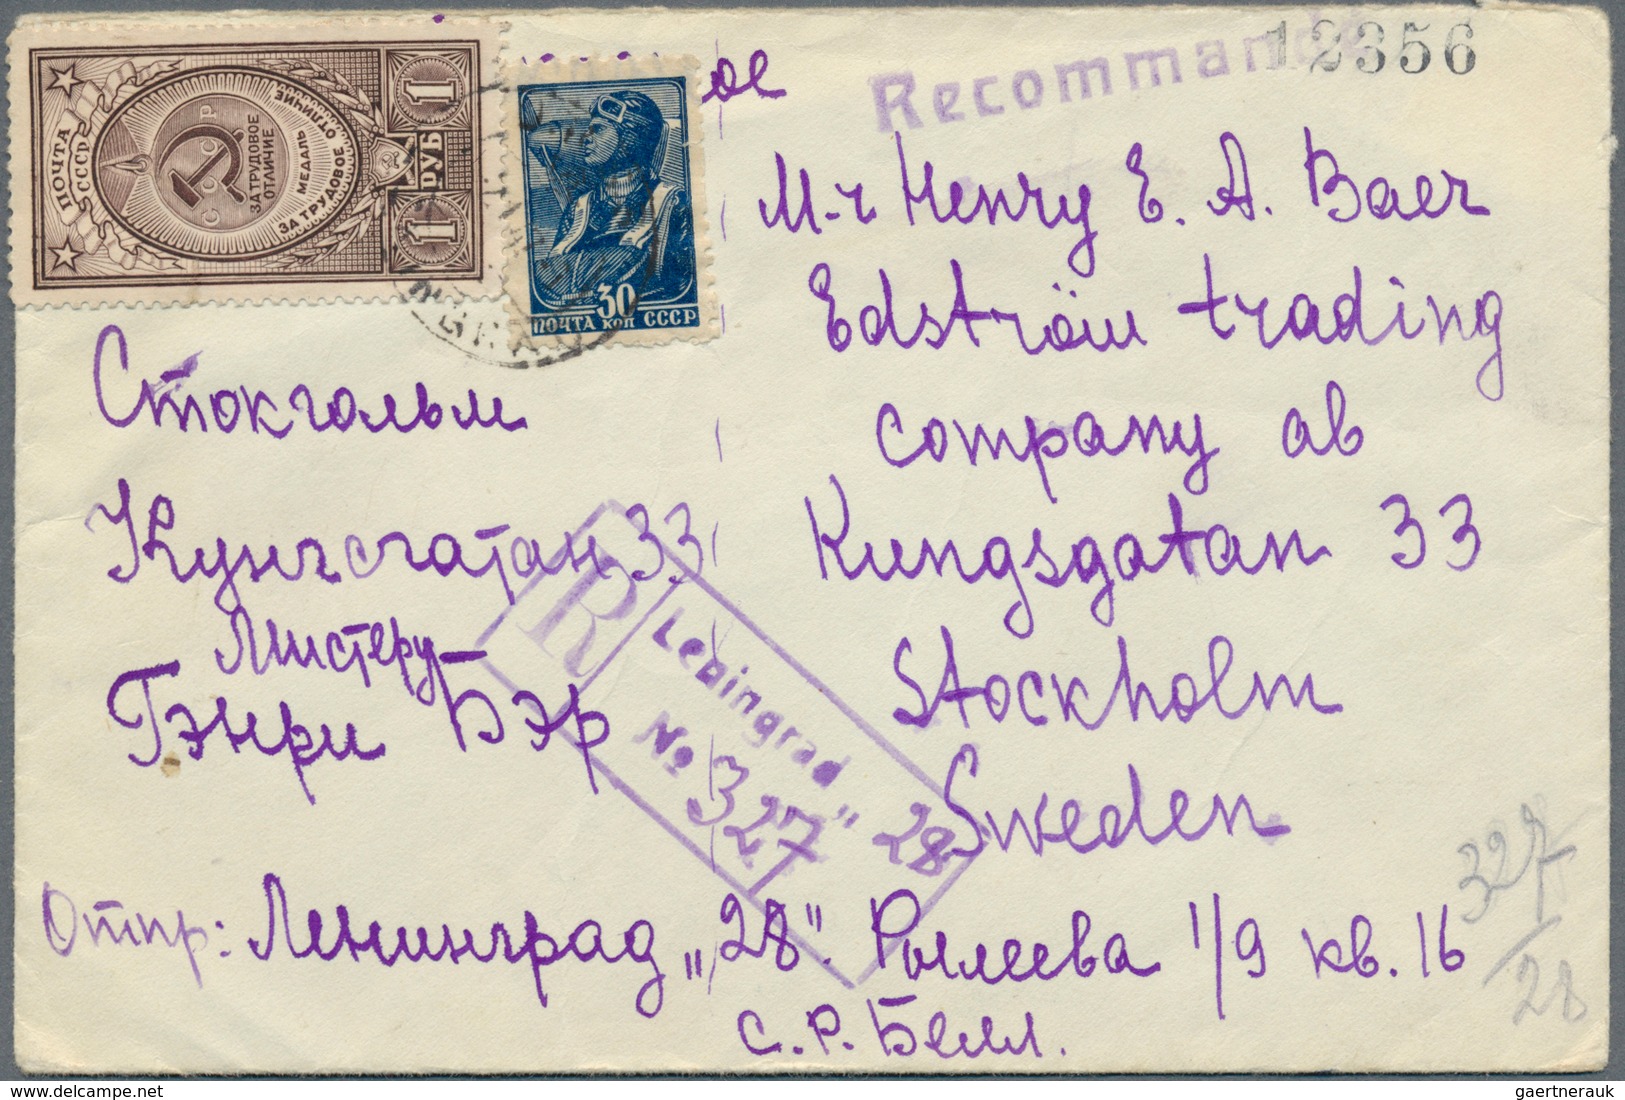 Russland - Ganzsachen: 1870's-1920's ca.: About 150 postal stationery items plus few covers, with ca